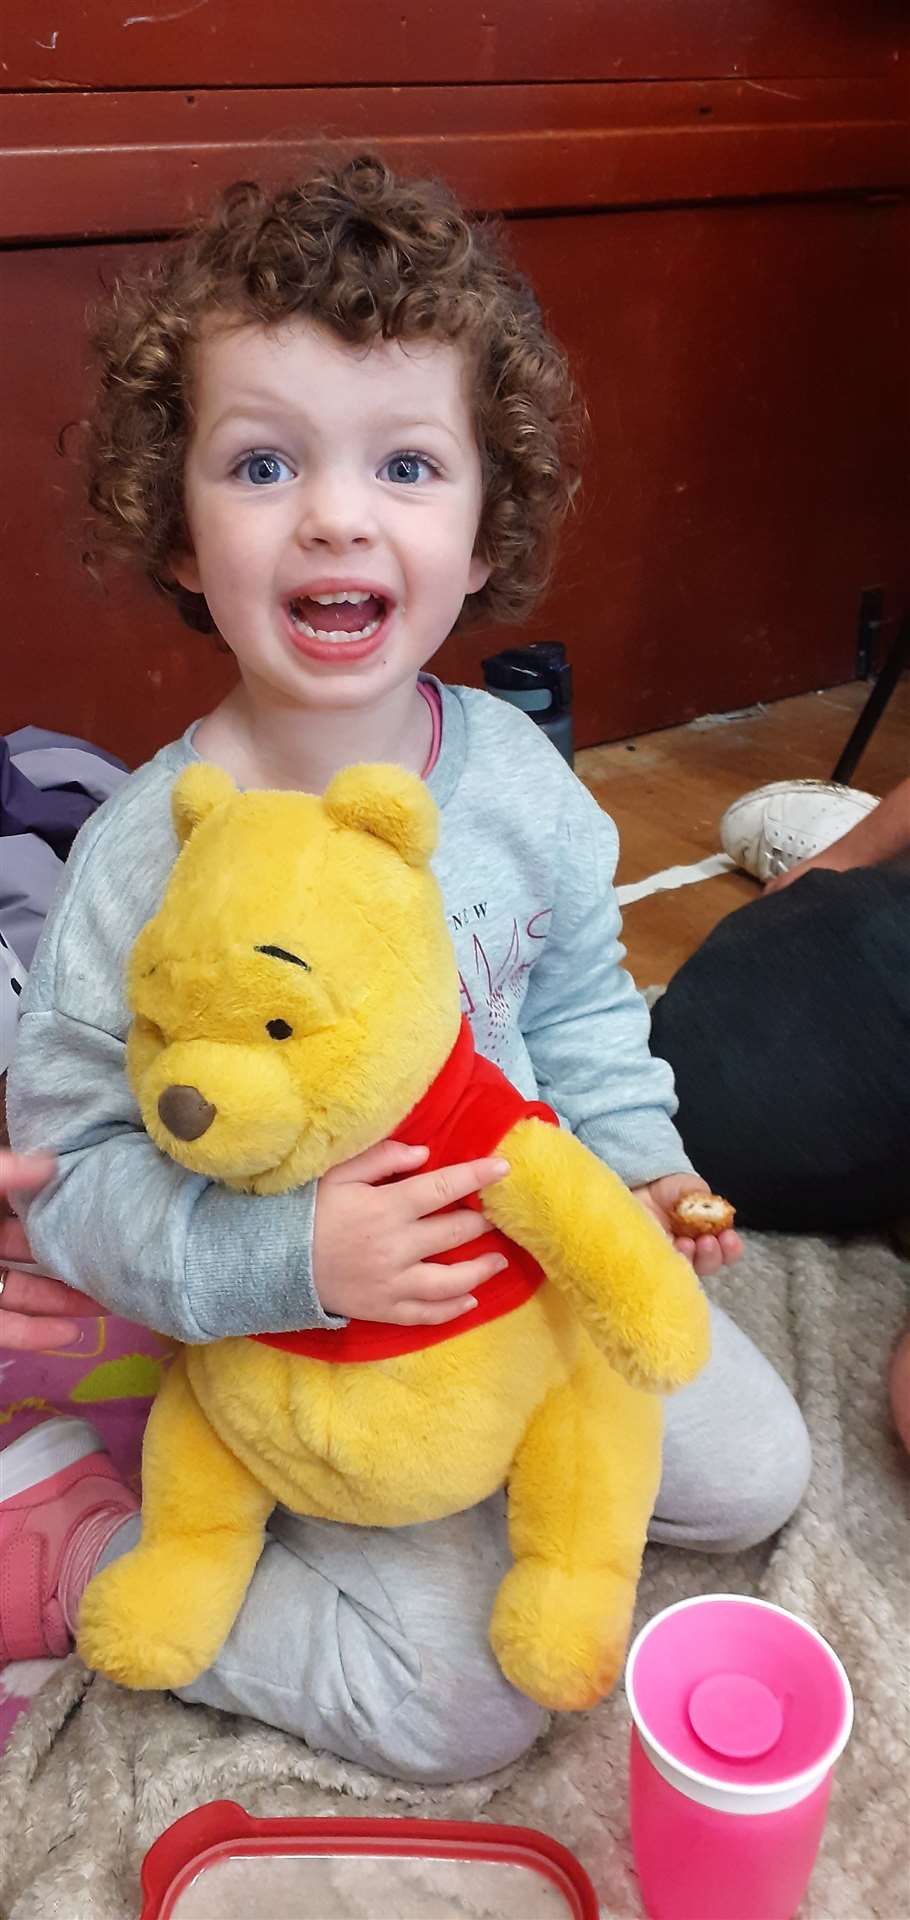 Thea has a good laugh with Winnie the Poo. Picture: Sharon Dismore